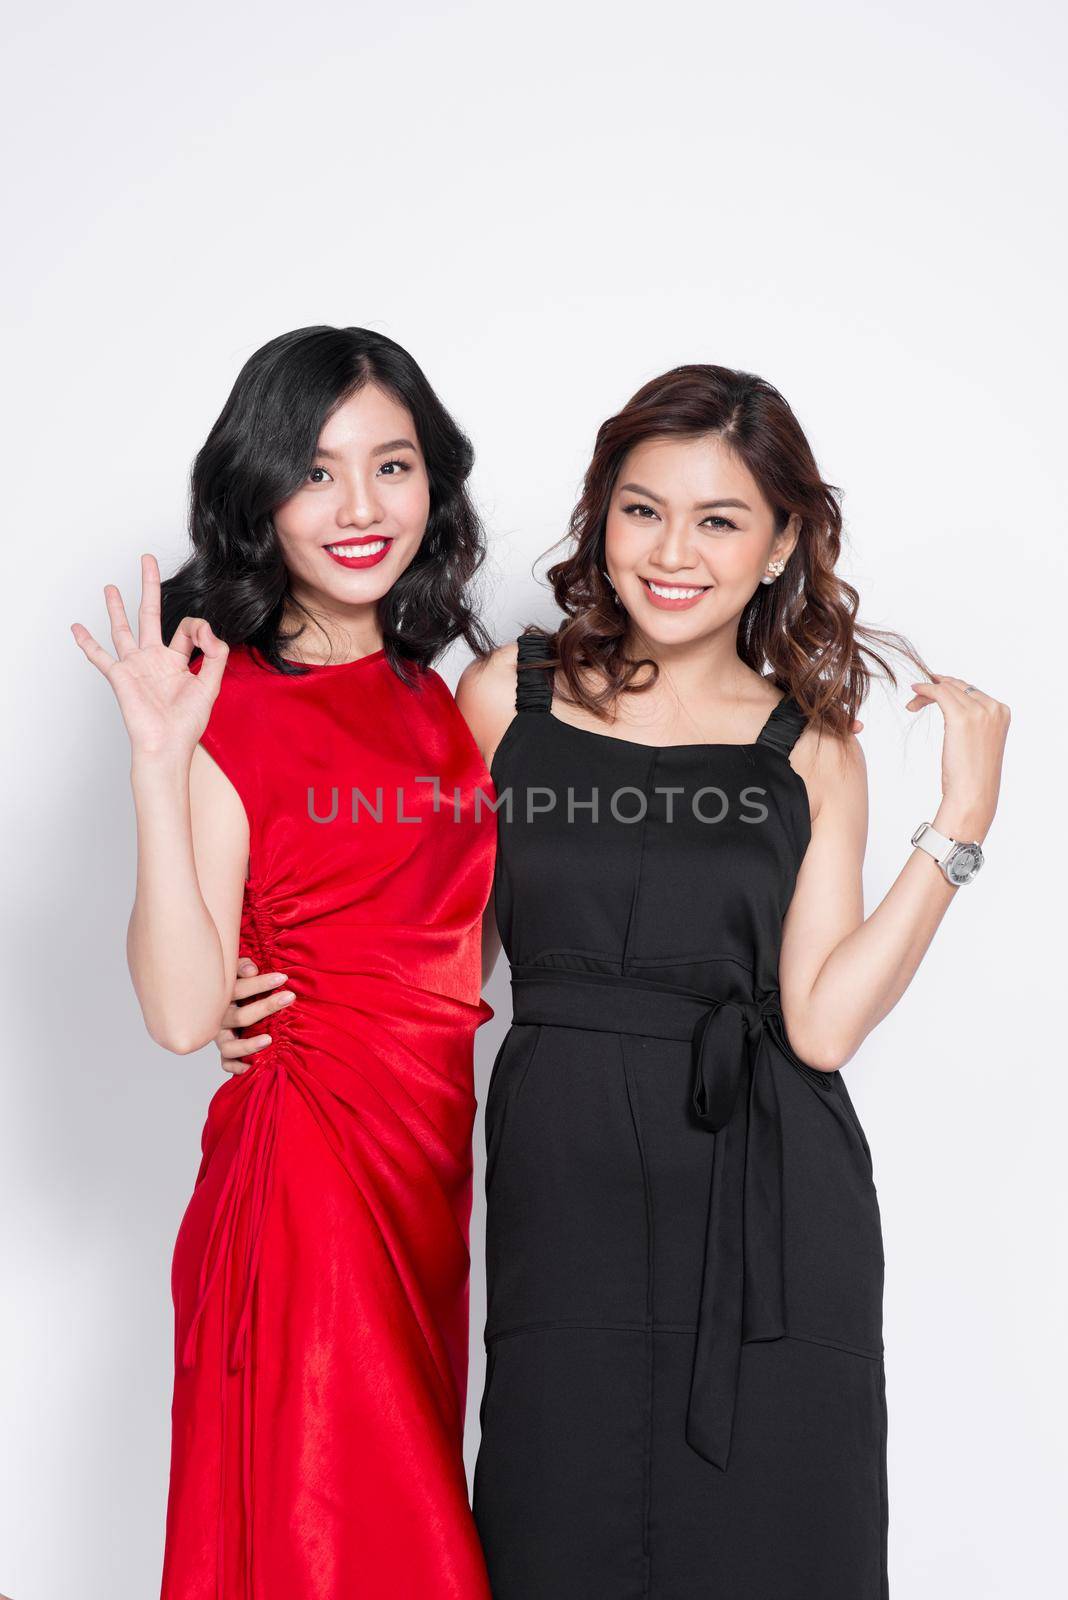 Two fashionable women in nice dresses standing together and having fun